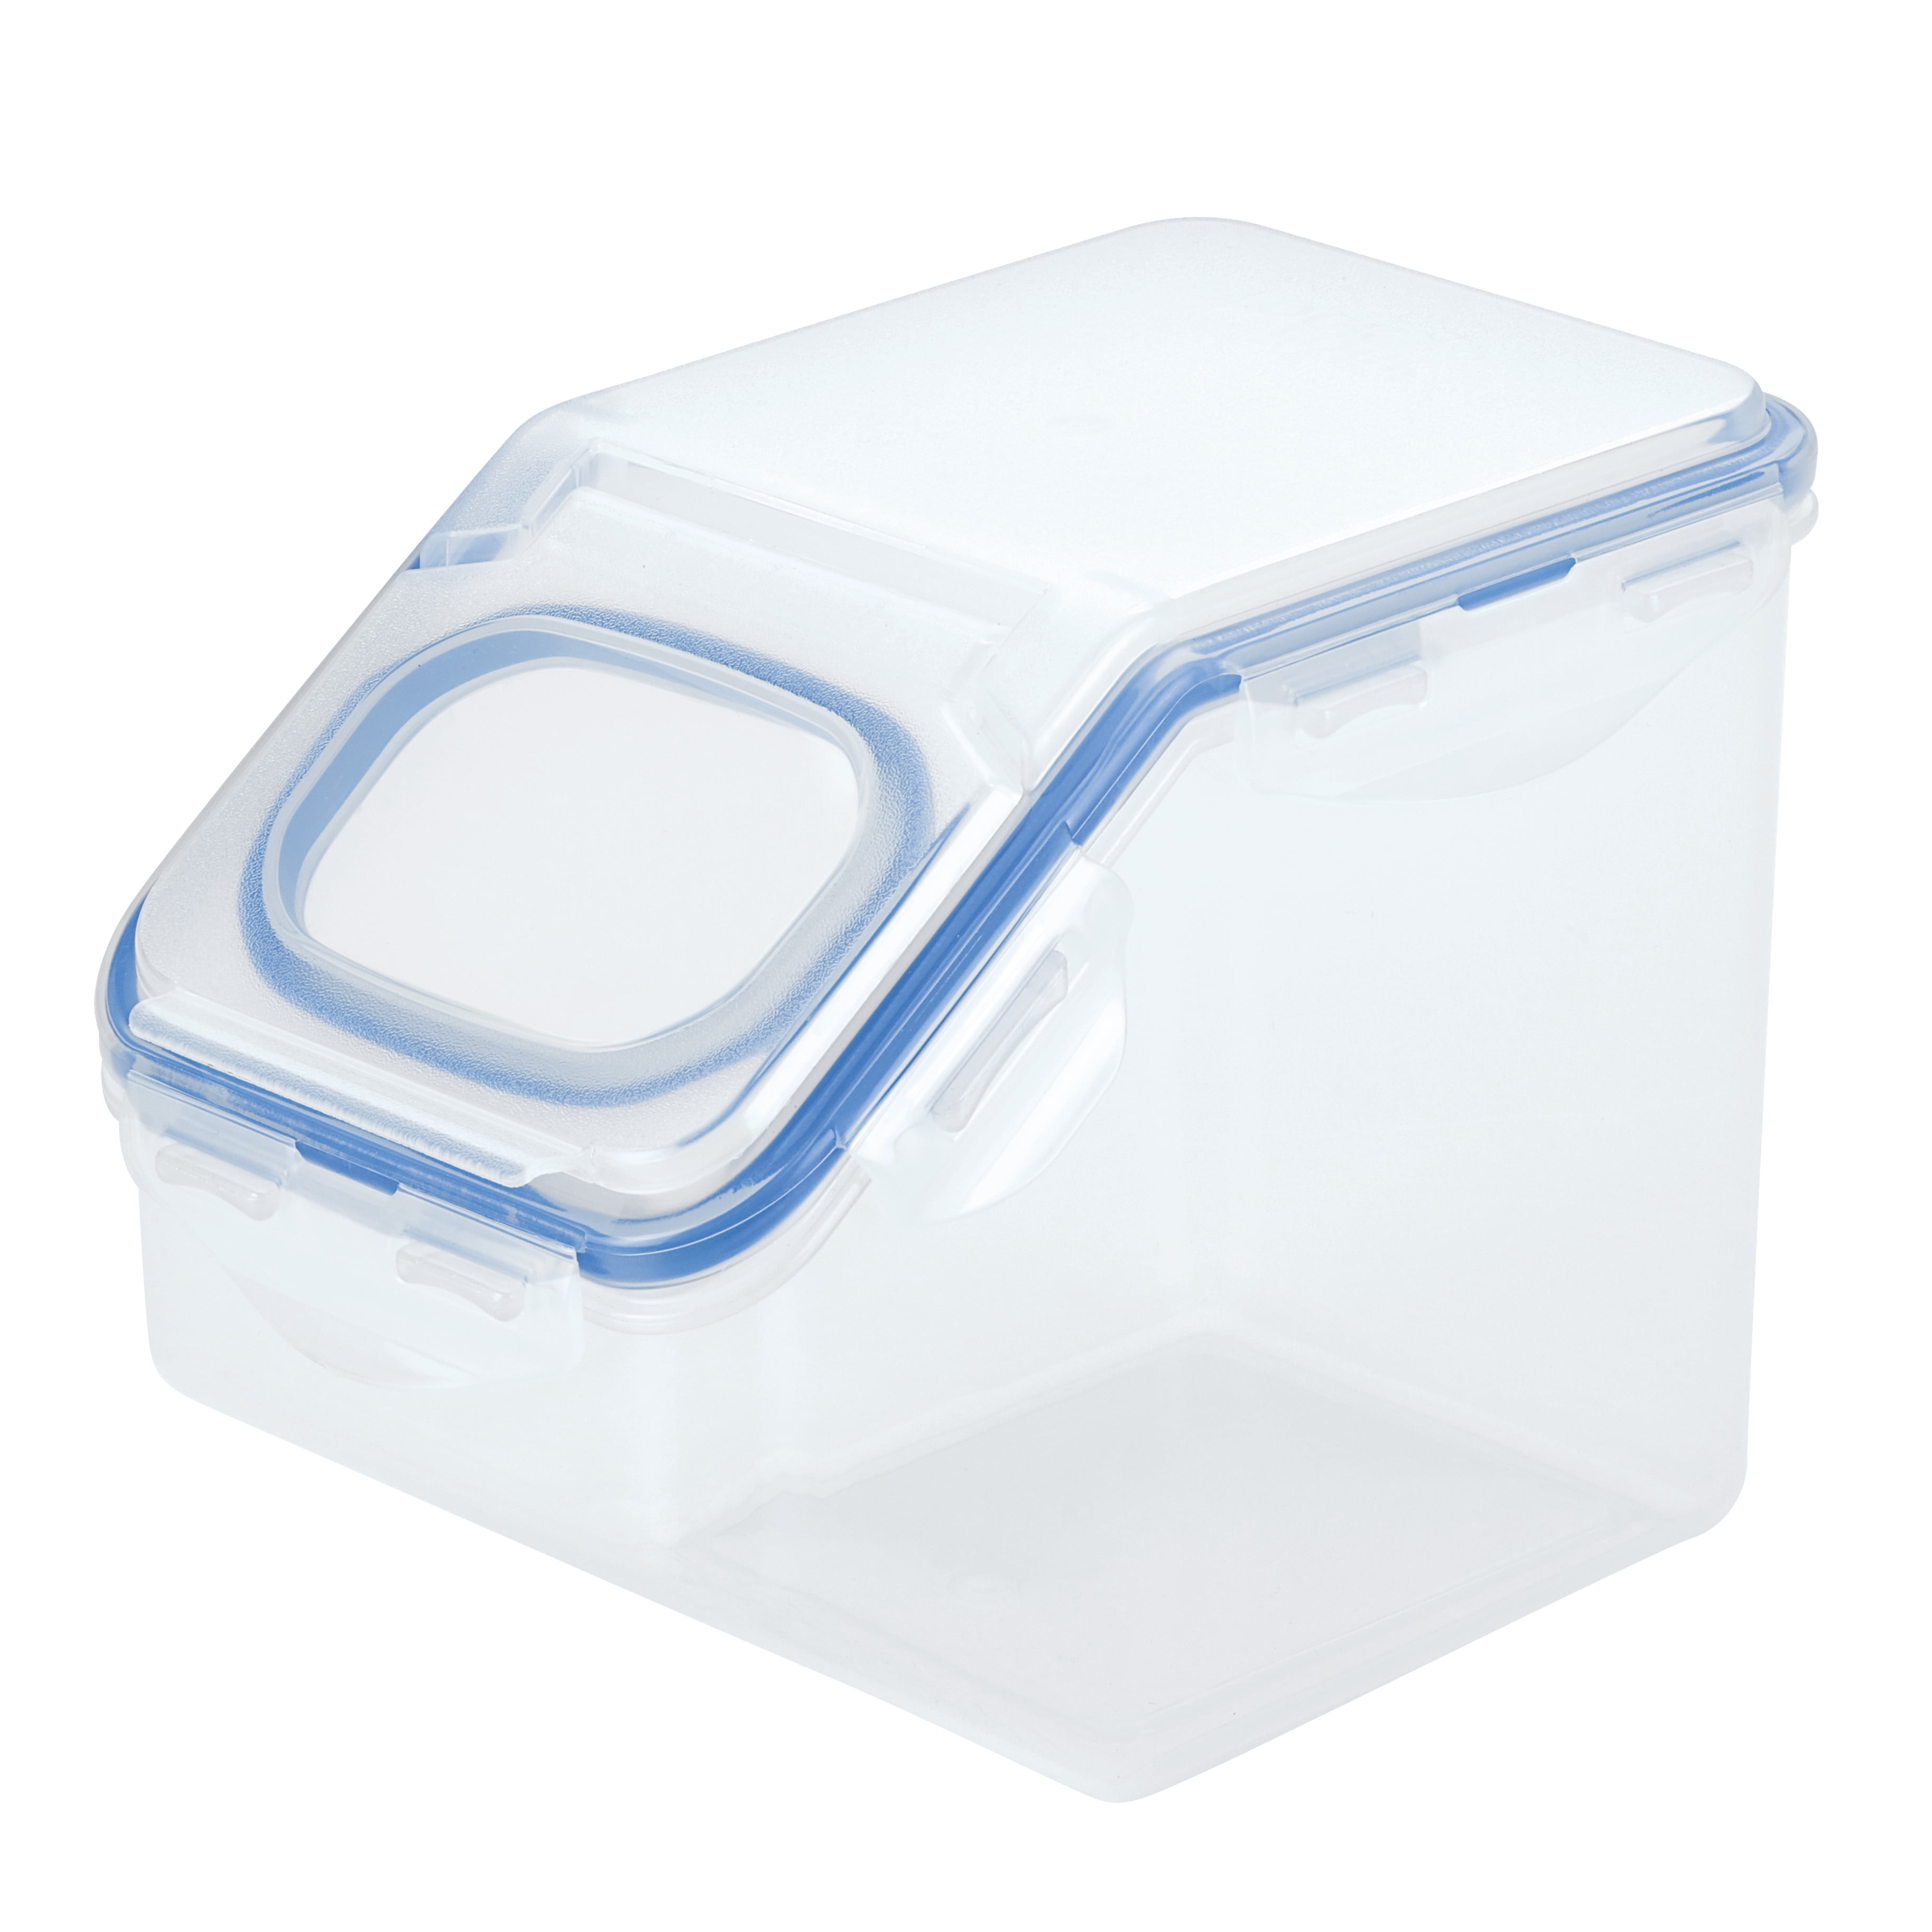 Plastic Kitchen Food Storage Containers With Flip Lock Lid Individuals